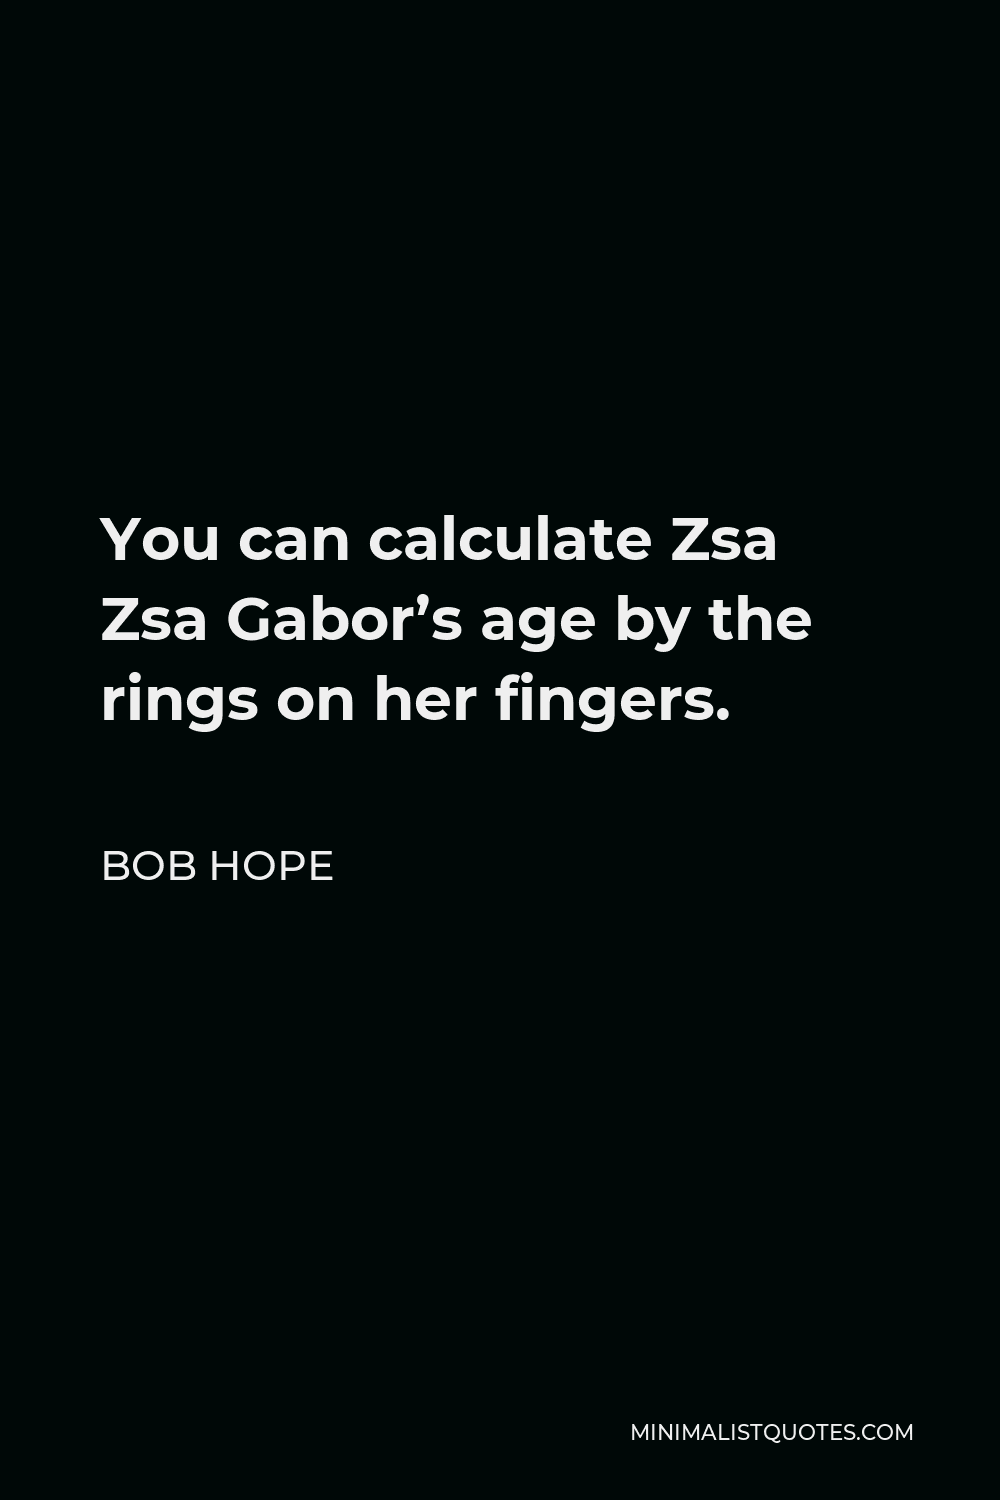 Bob Hope Quote - You can calculate Zsa Zsa Gabor’s age by the rings on her fingers.